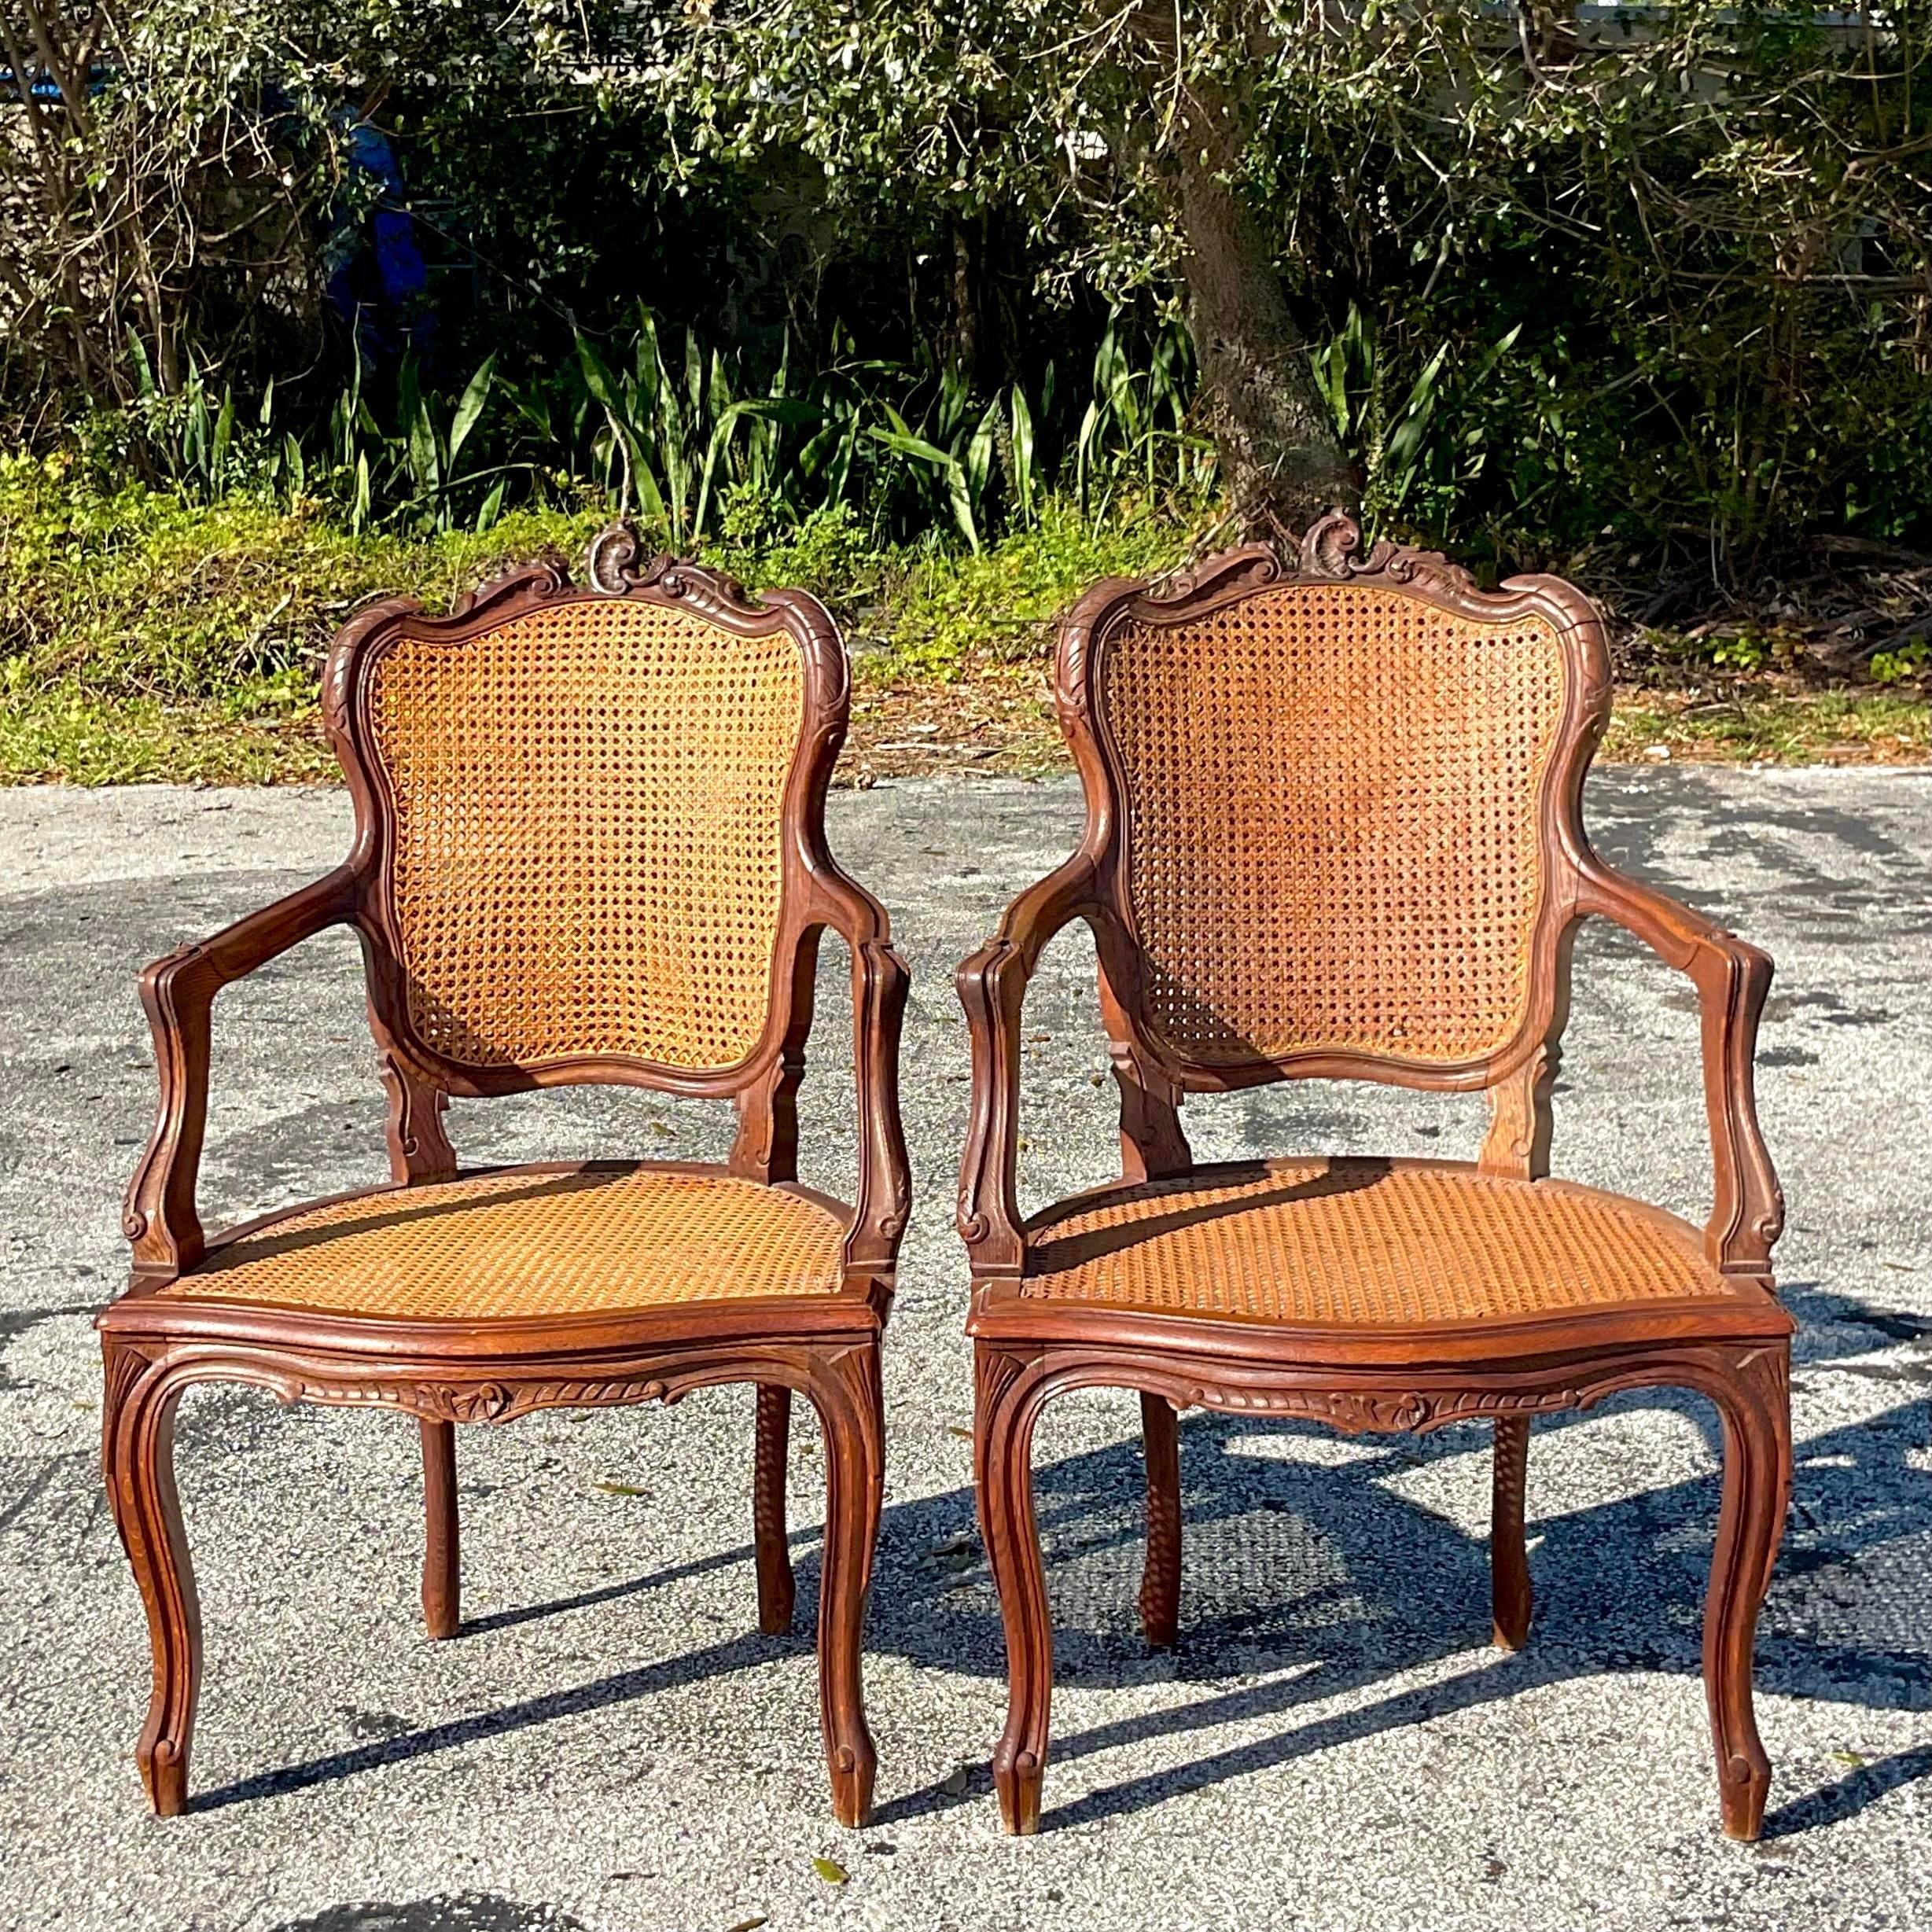 Vintage Boho Carved Wooden Chairs With Inset Cane Panels - a Pair For Sale 3